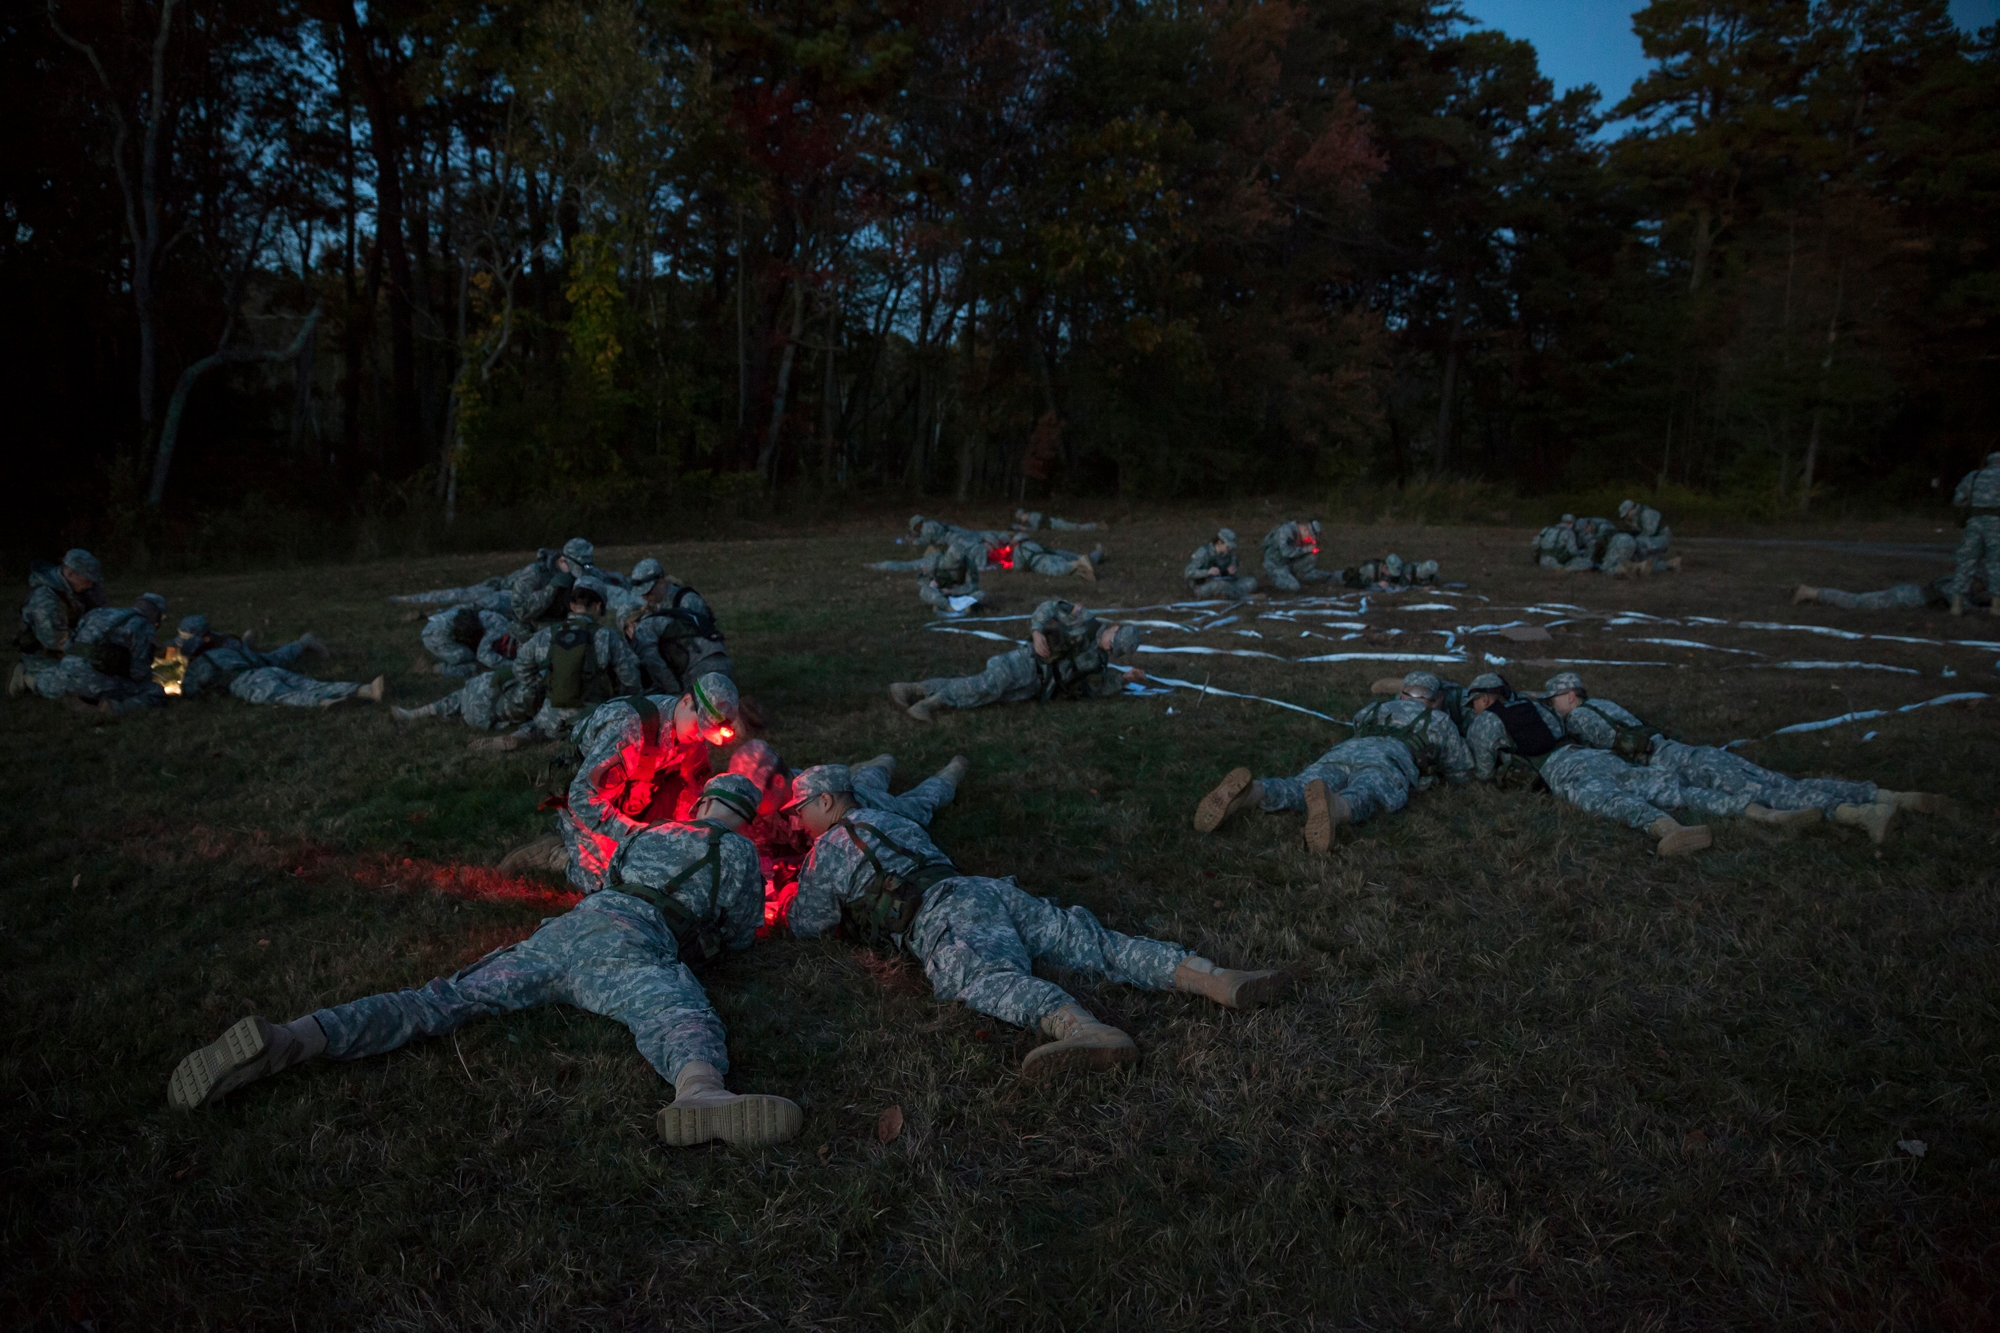 soldiers in training exercise